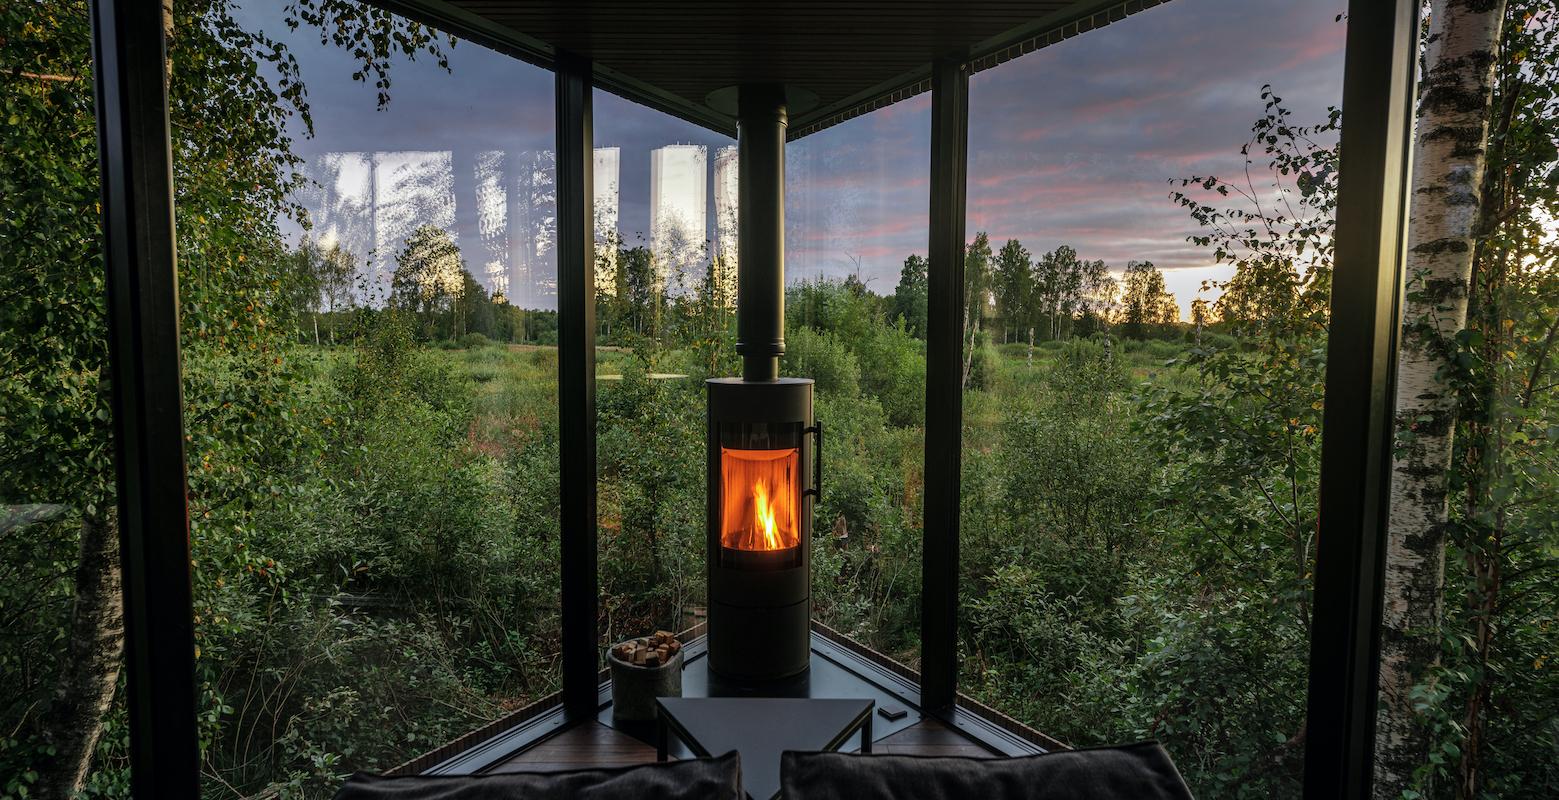 A unique Nature Villa, located just 50 min drive away from Tallinn, awaits guests to have a private accommodation where they will experience stunning 